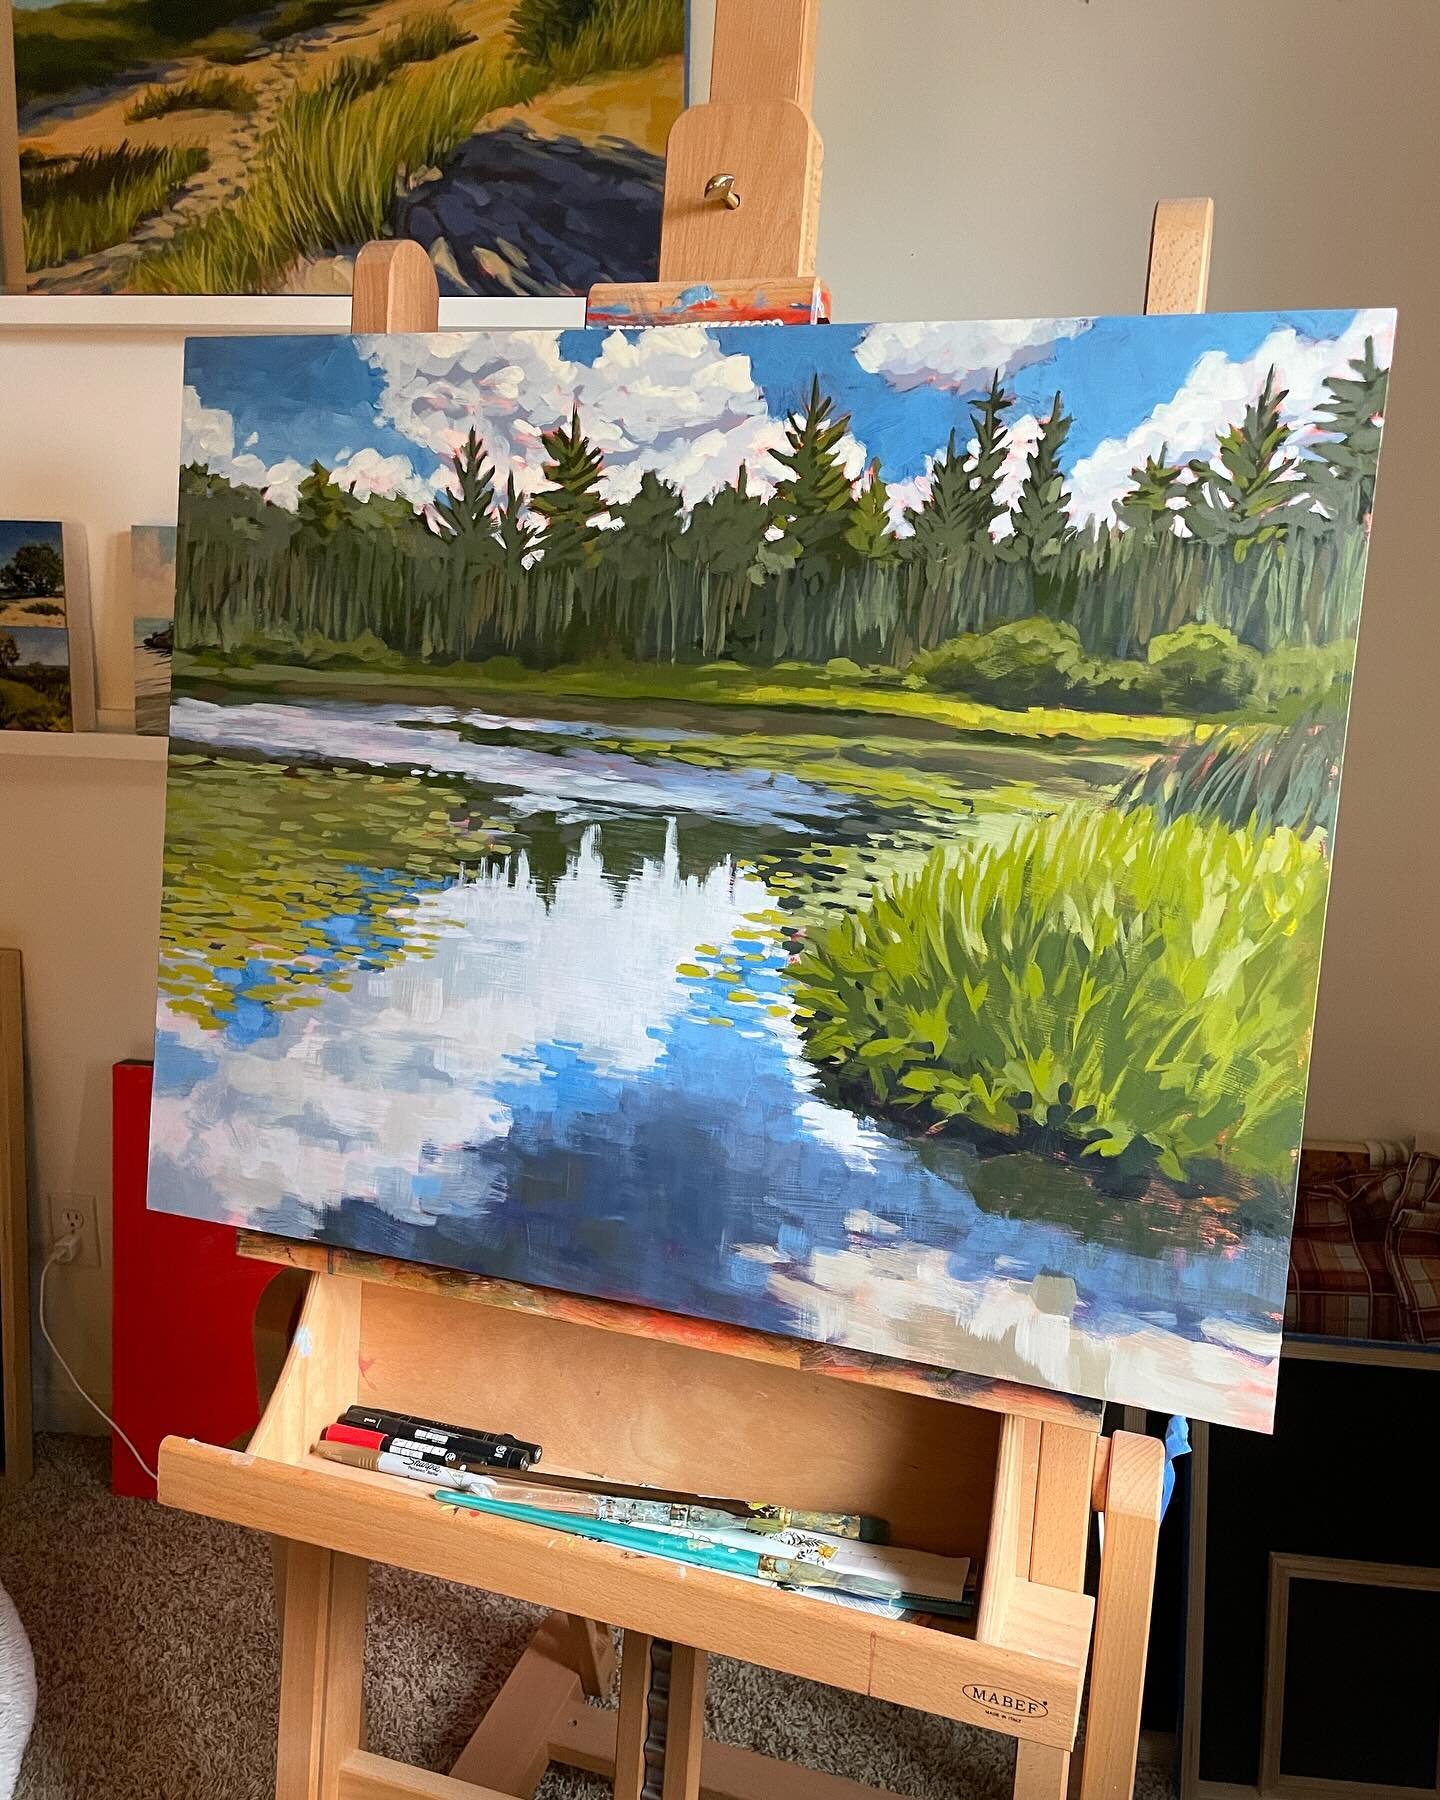 Currently on the easel: this view of Ellis Lake near Interlochen. This will be another painting I&rsquo;ll be exhibiting in my Water Wonderland collection @charlevoixlibrary during the month of May. This group of 20 paintings depicts various water sc